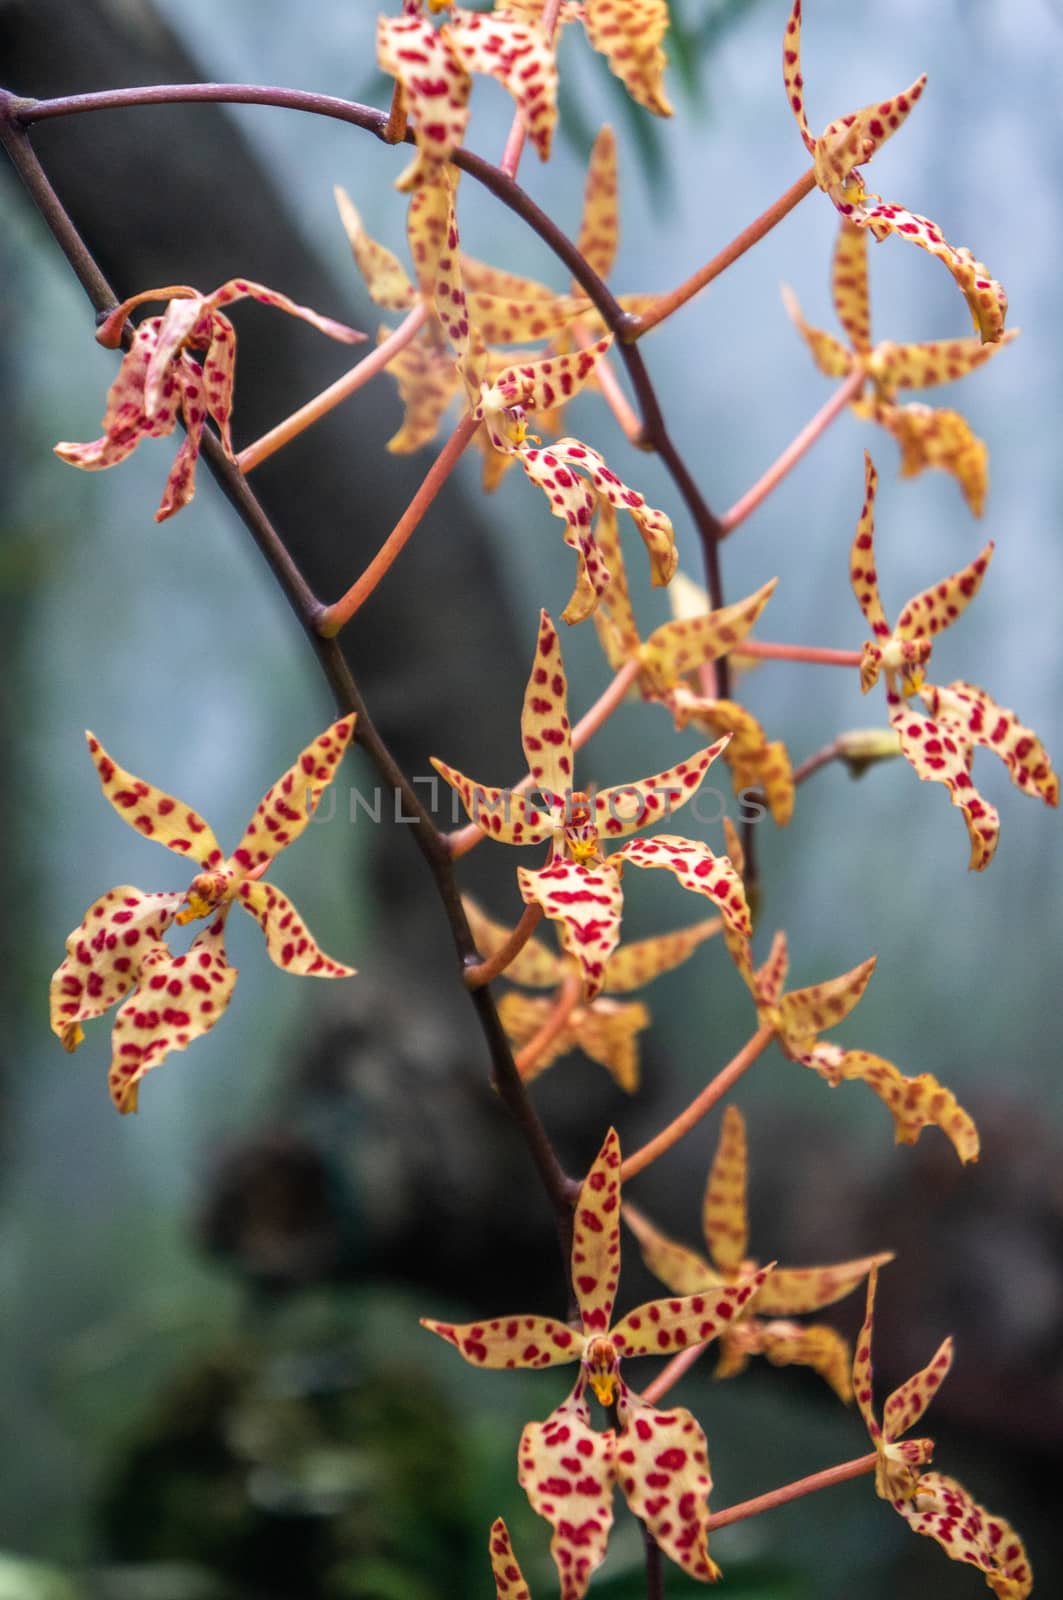 Red dotted yellow moth orchids "Renanthera monachica" by sara_lissaker